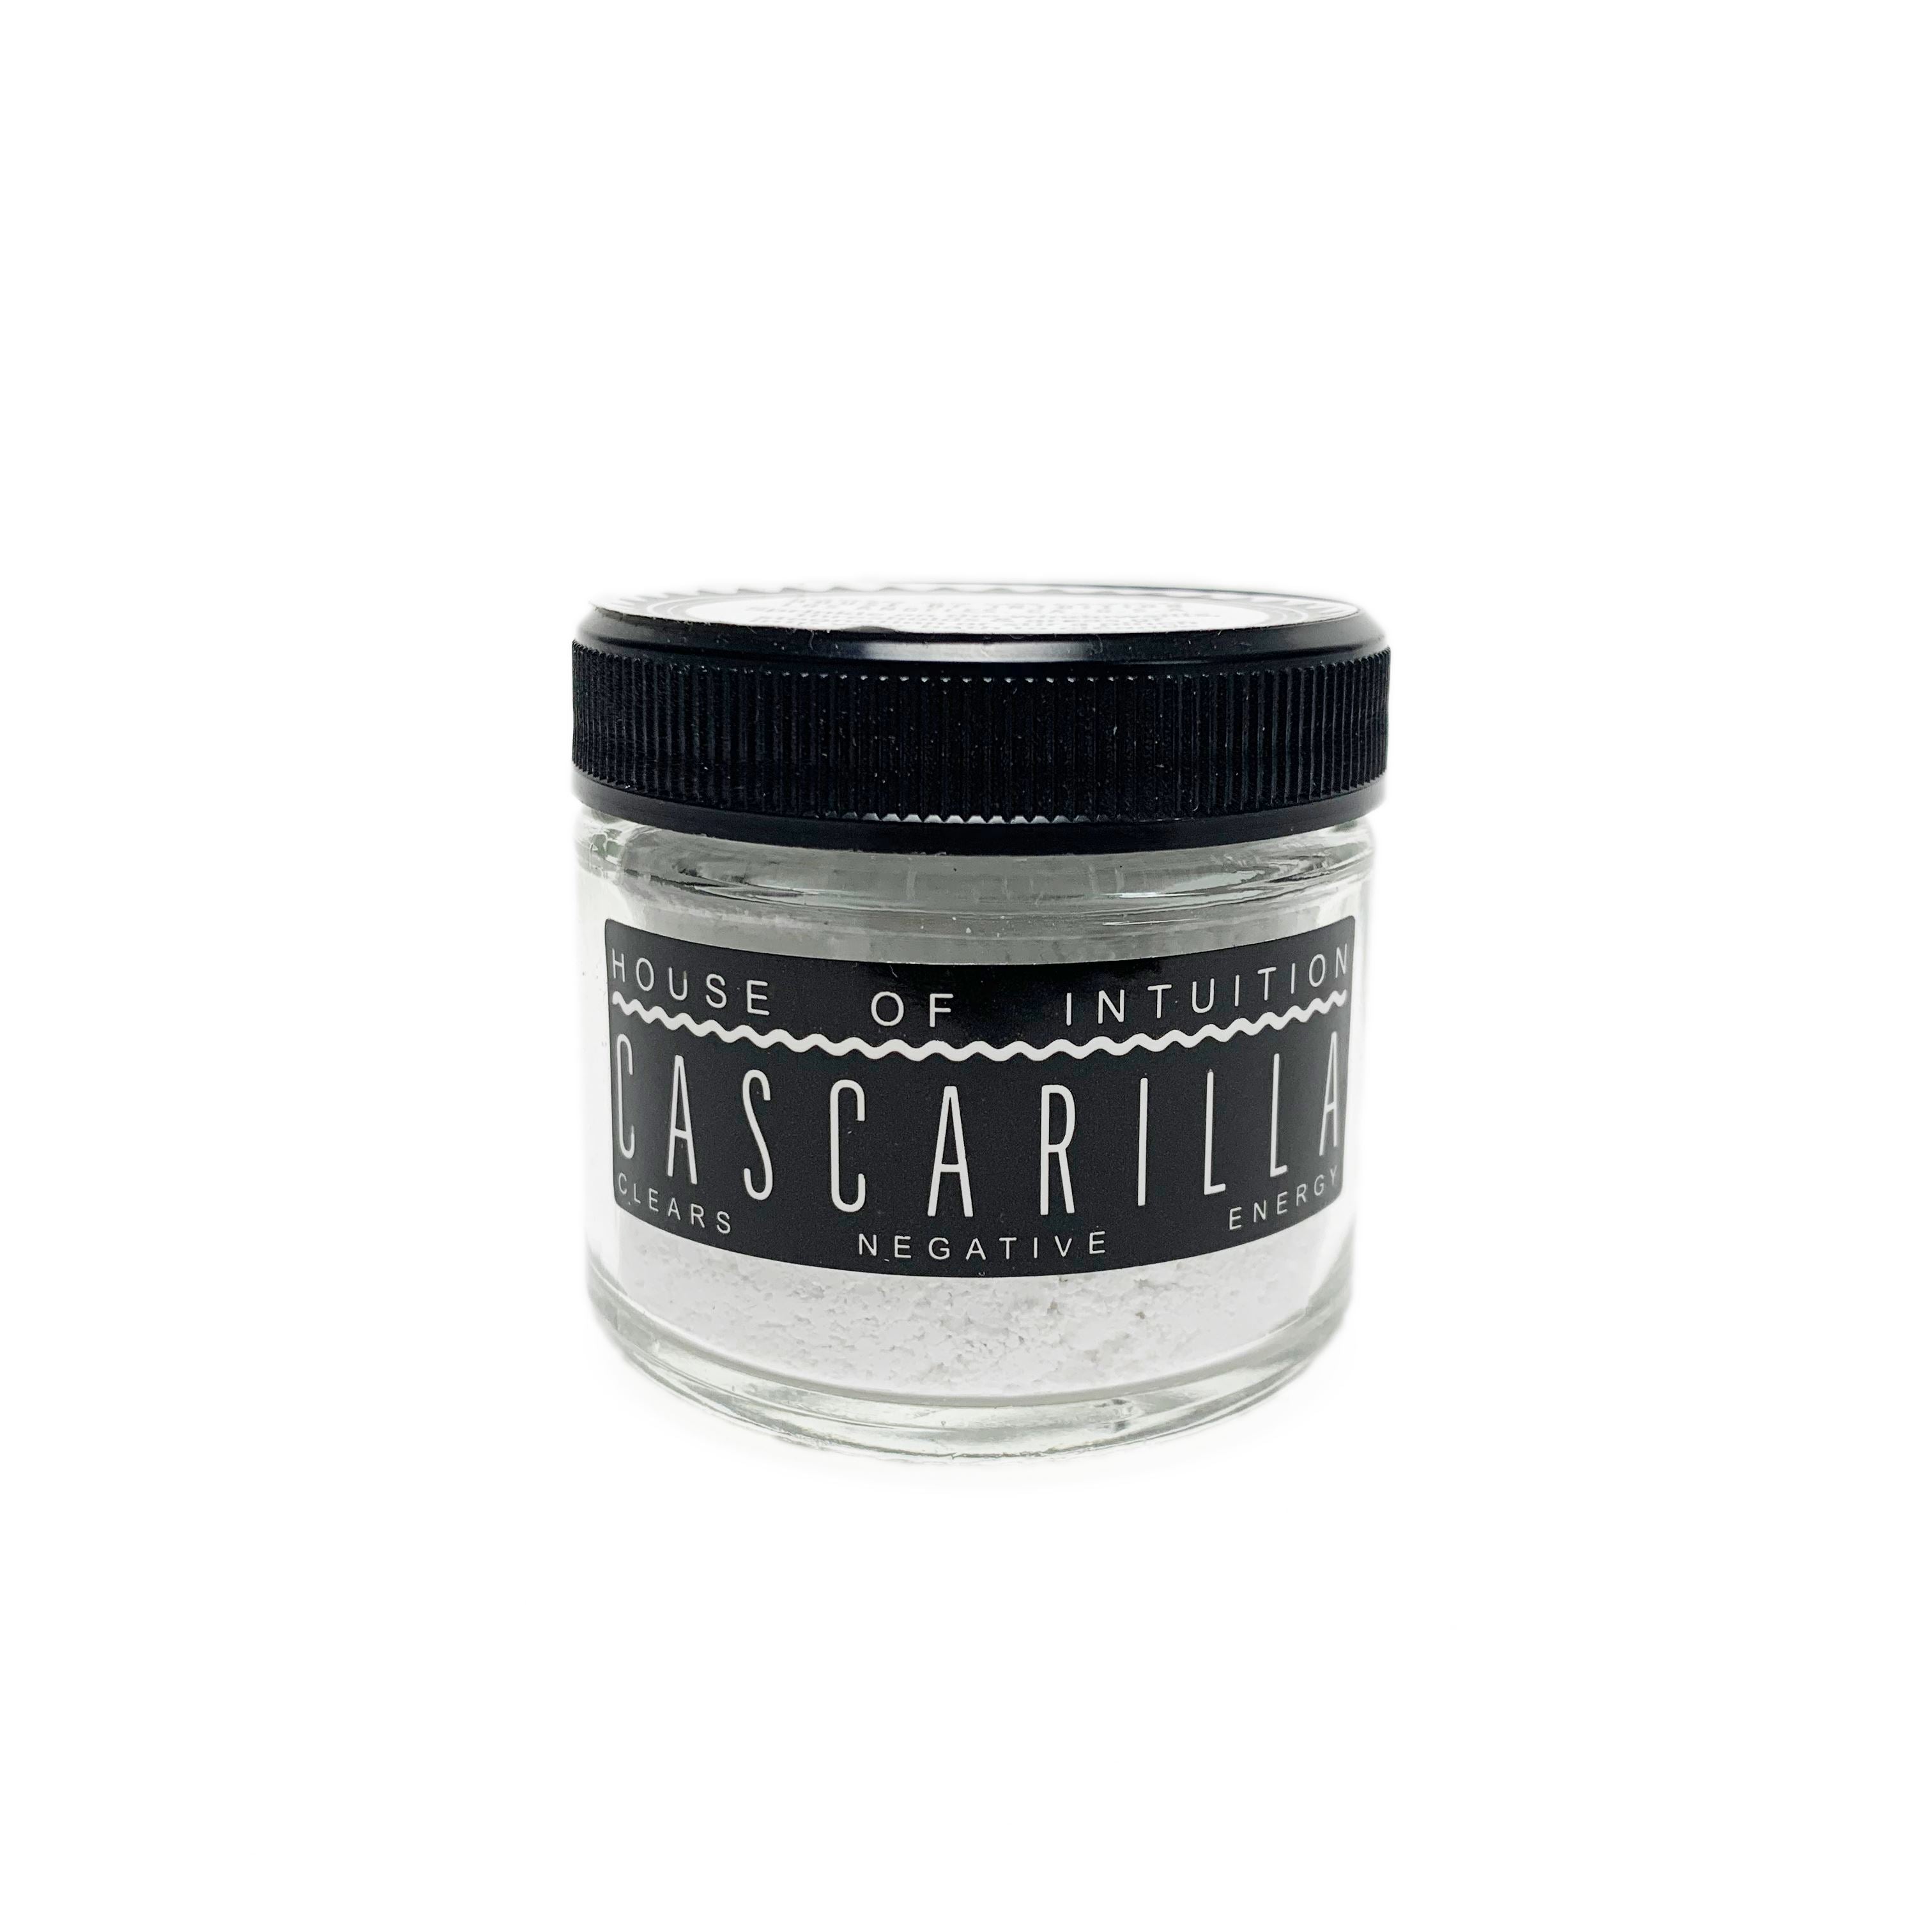 Cascarilla: A Guide To Its Ritual and Spiritual Uses